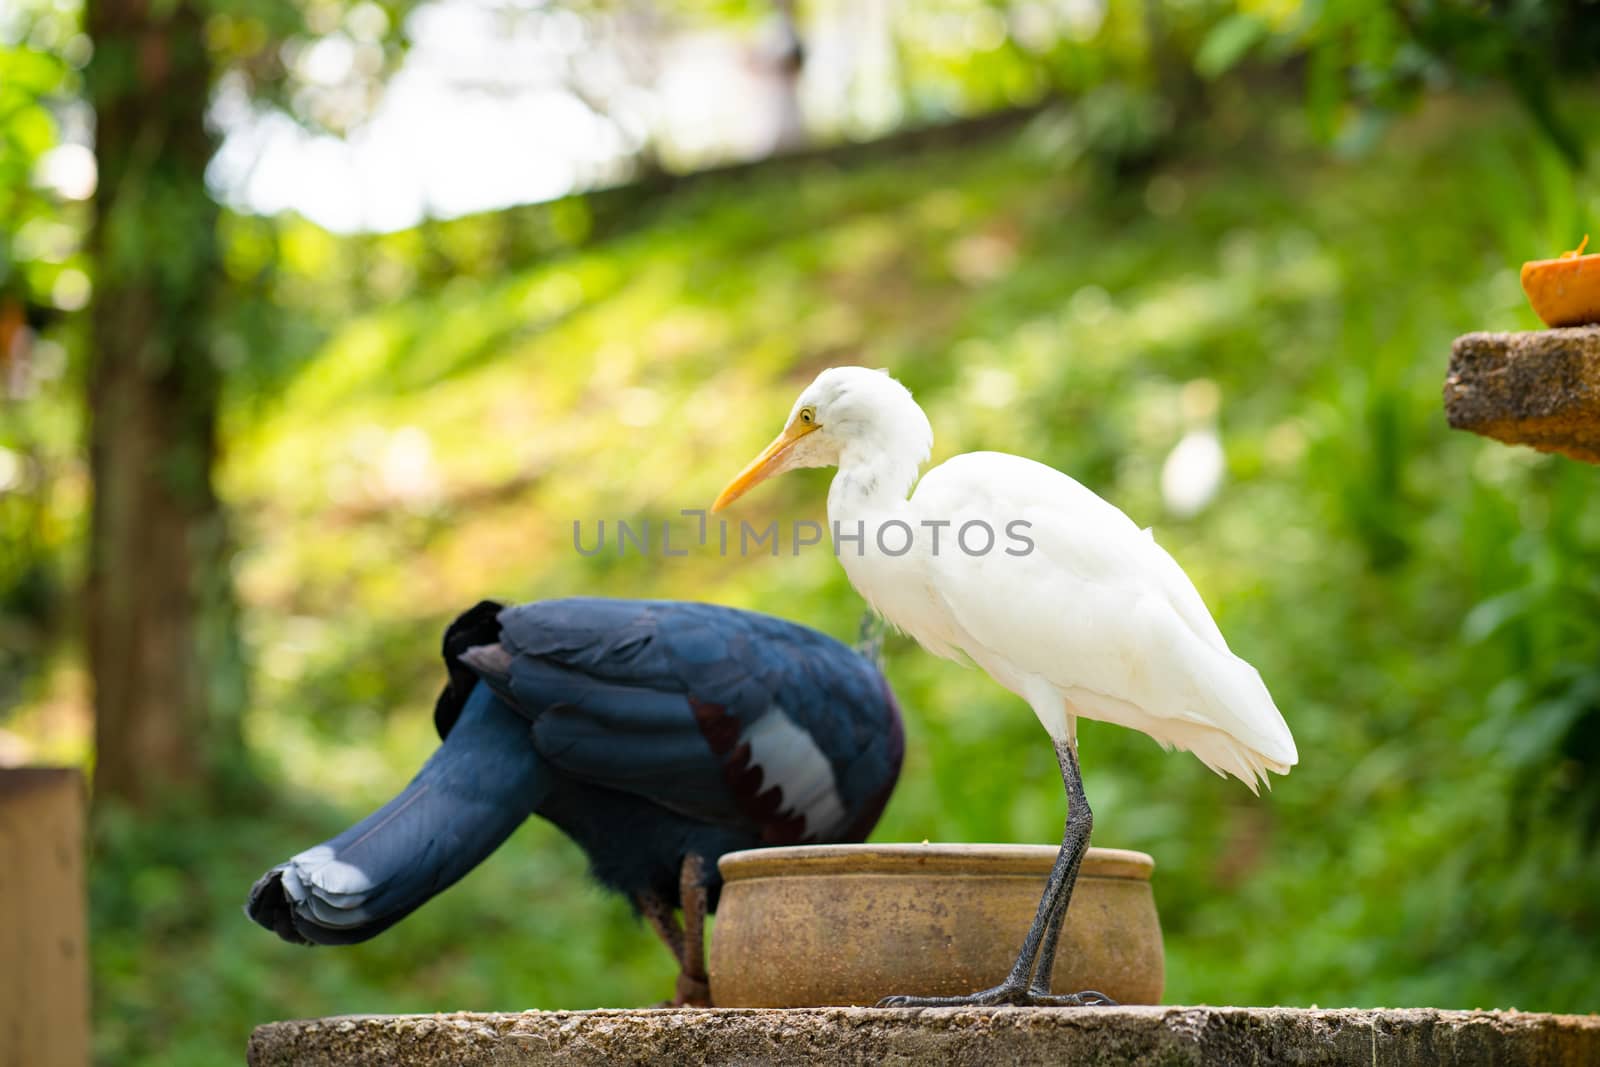 Southern Crowned Pigeon and heron eat core from one feeding trough in a bird park